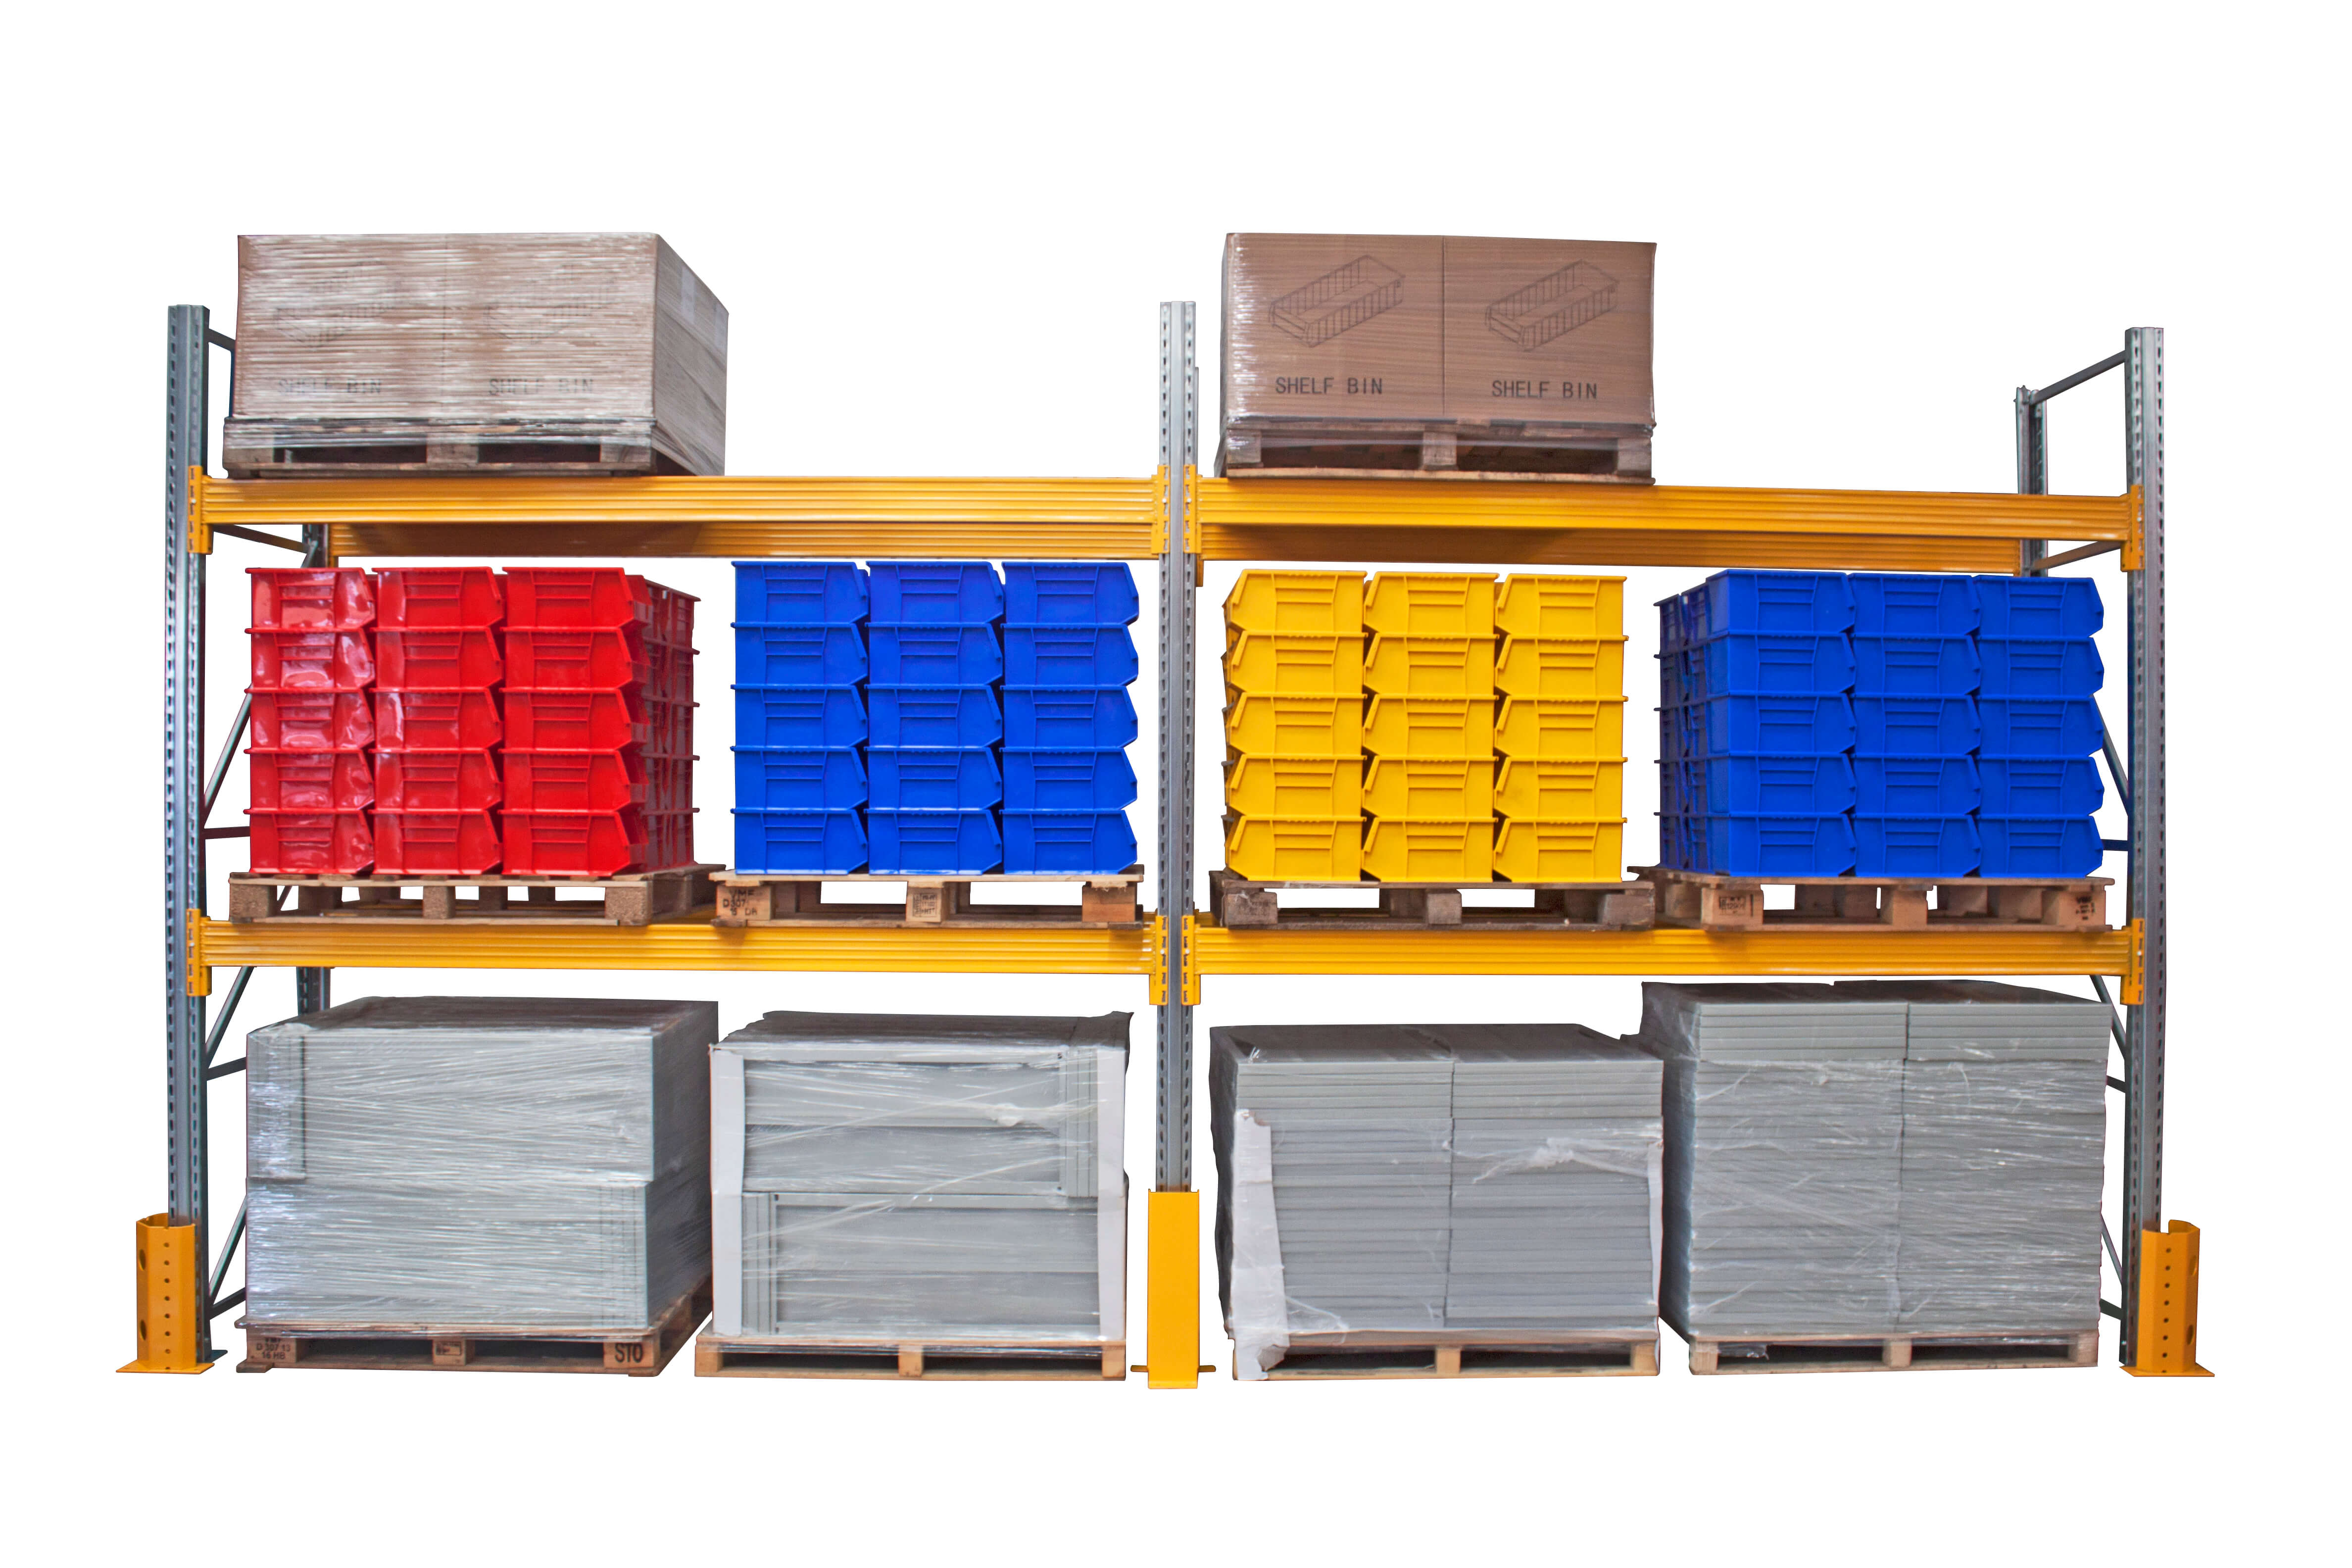 Heavy Duty Pallet Racking 3 Levels - 5000x5742x900mm - Beam Load up to 3790kg UDL.